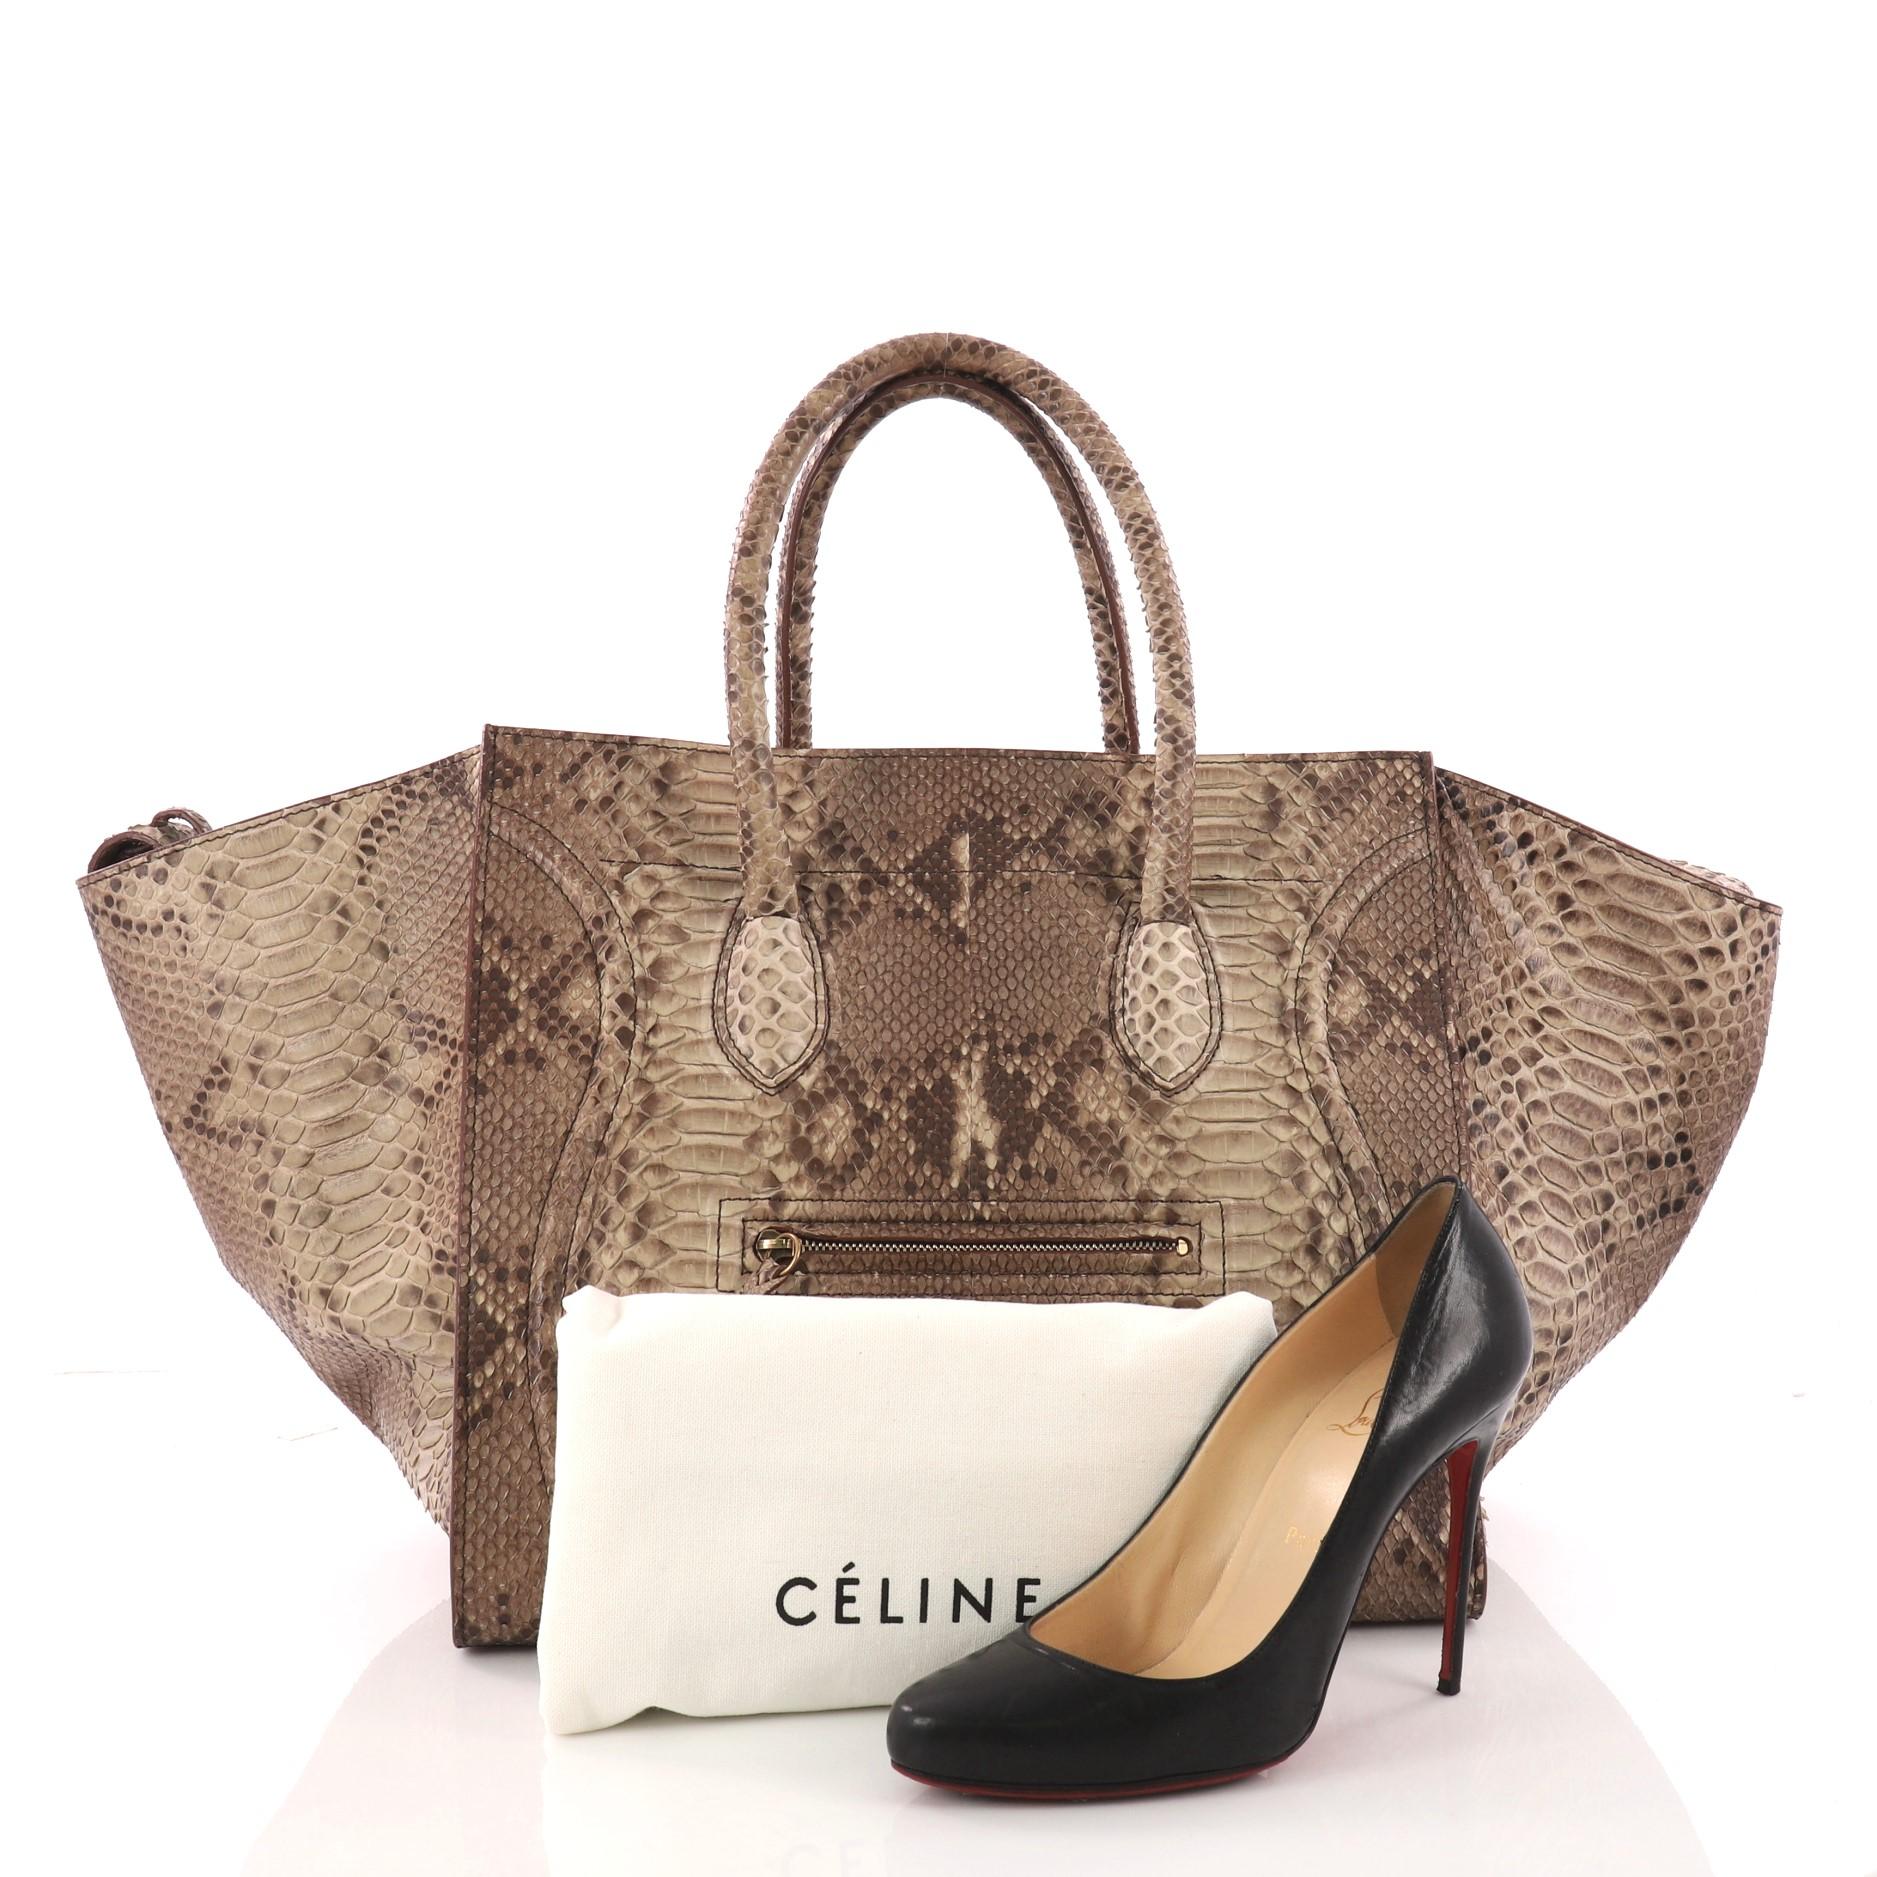 This authentic Celine Phantom Handbag Python Large is one of the most sought-after bags beloved by fashionistas. Crafted from genine brown python skin, this minimalist tote features dual-rolled handles, an exterior front pocket, protective base